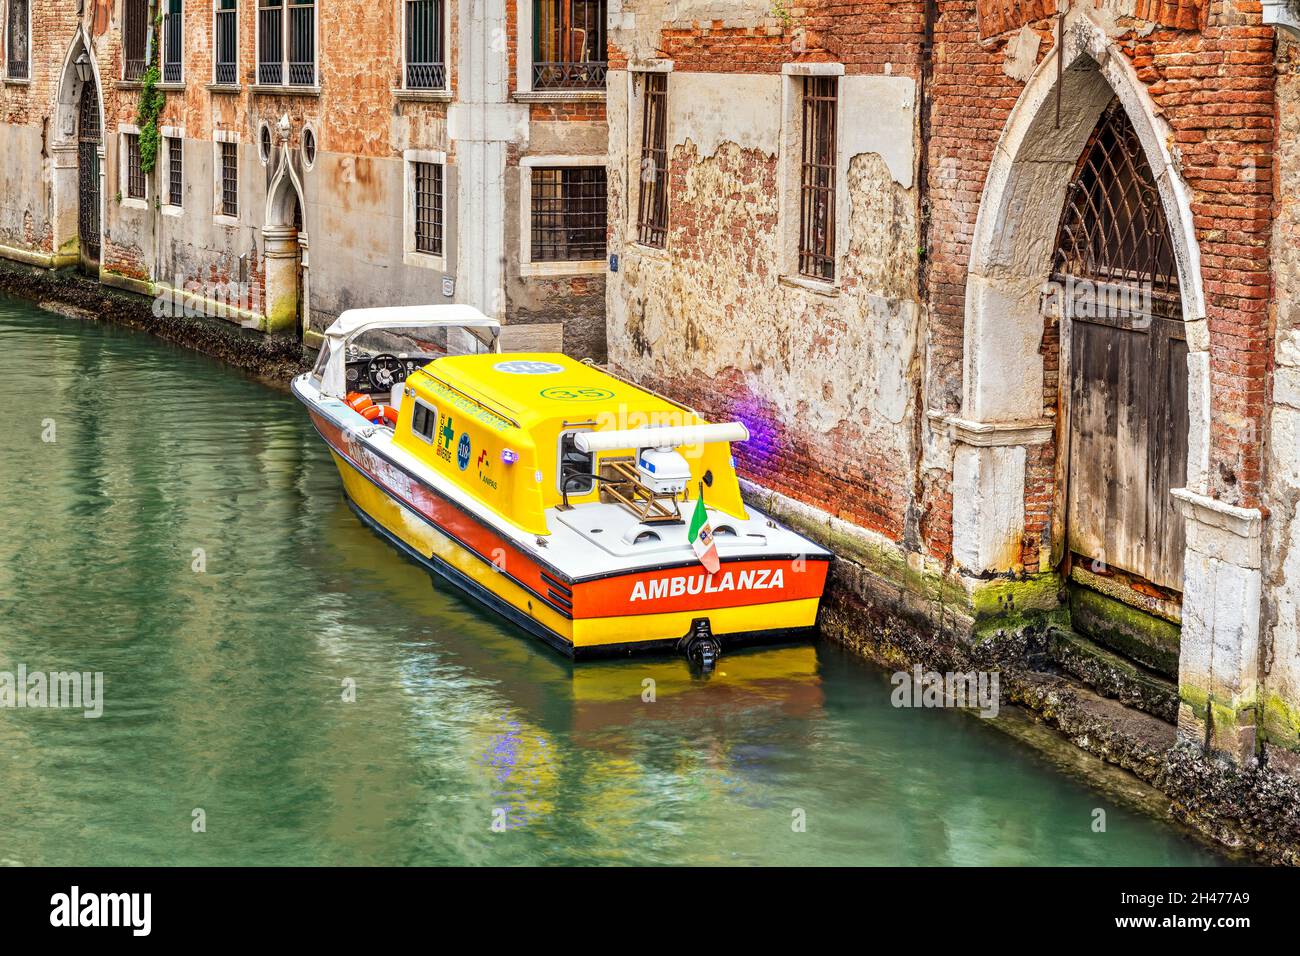 Water ambulance boat moored in a canal, Venice, Veneto, Italy Stock Photo